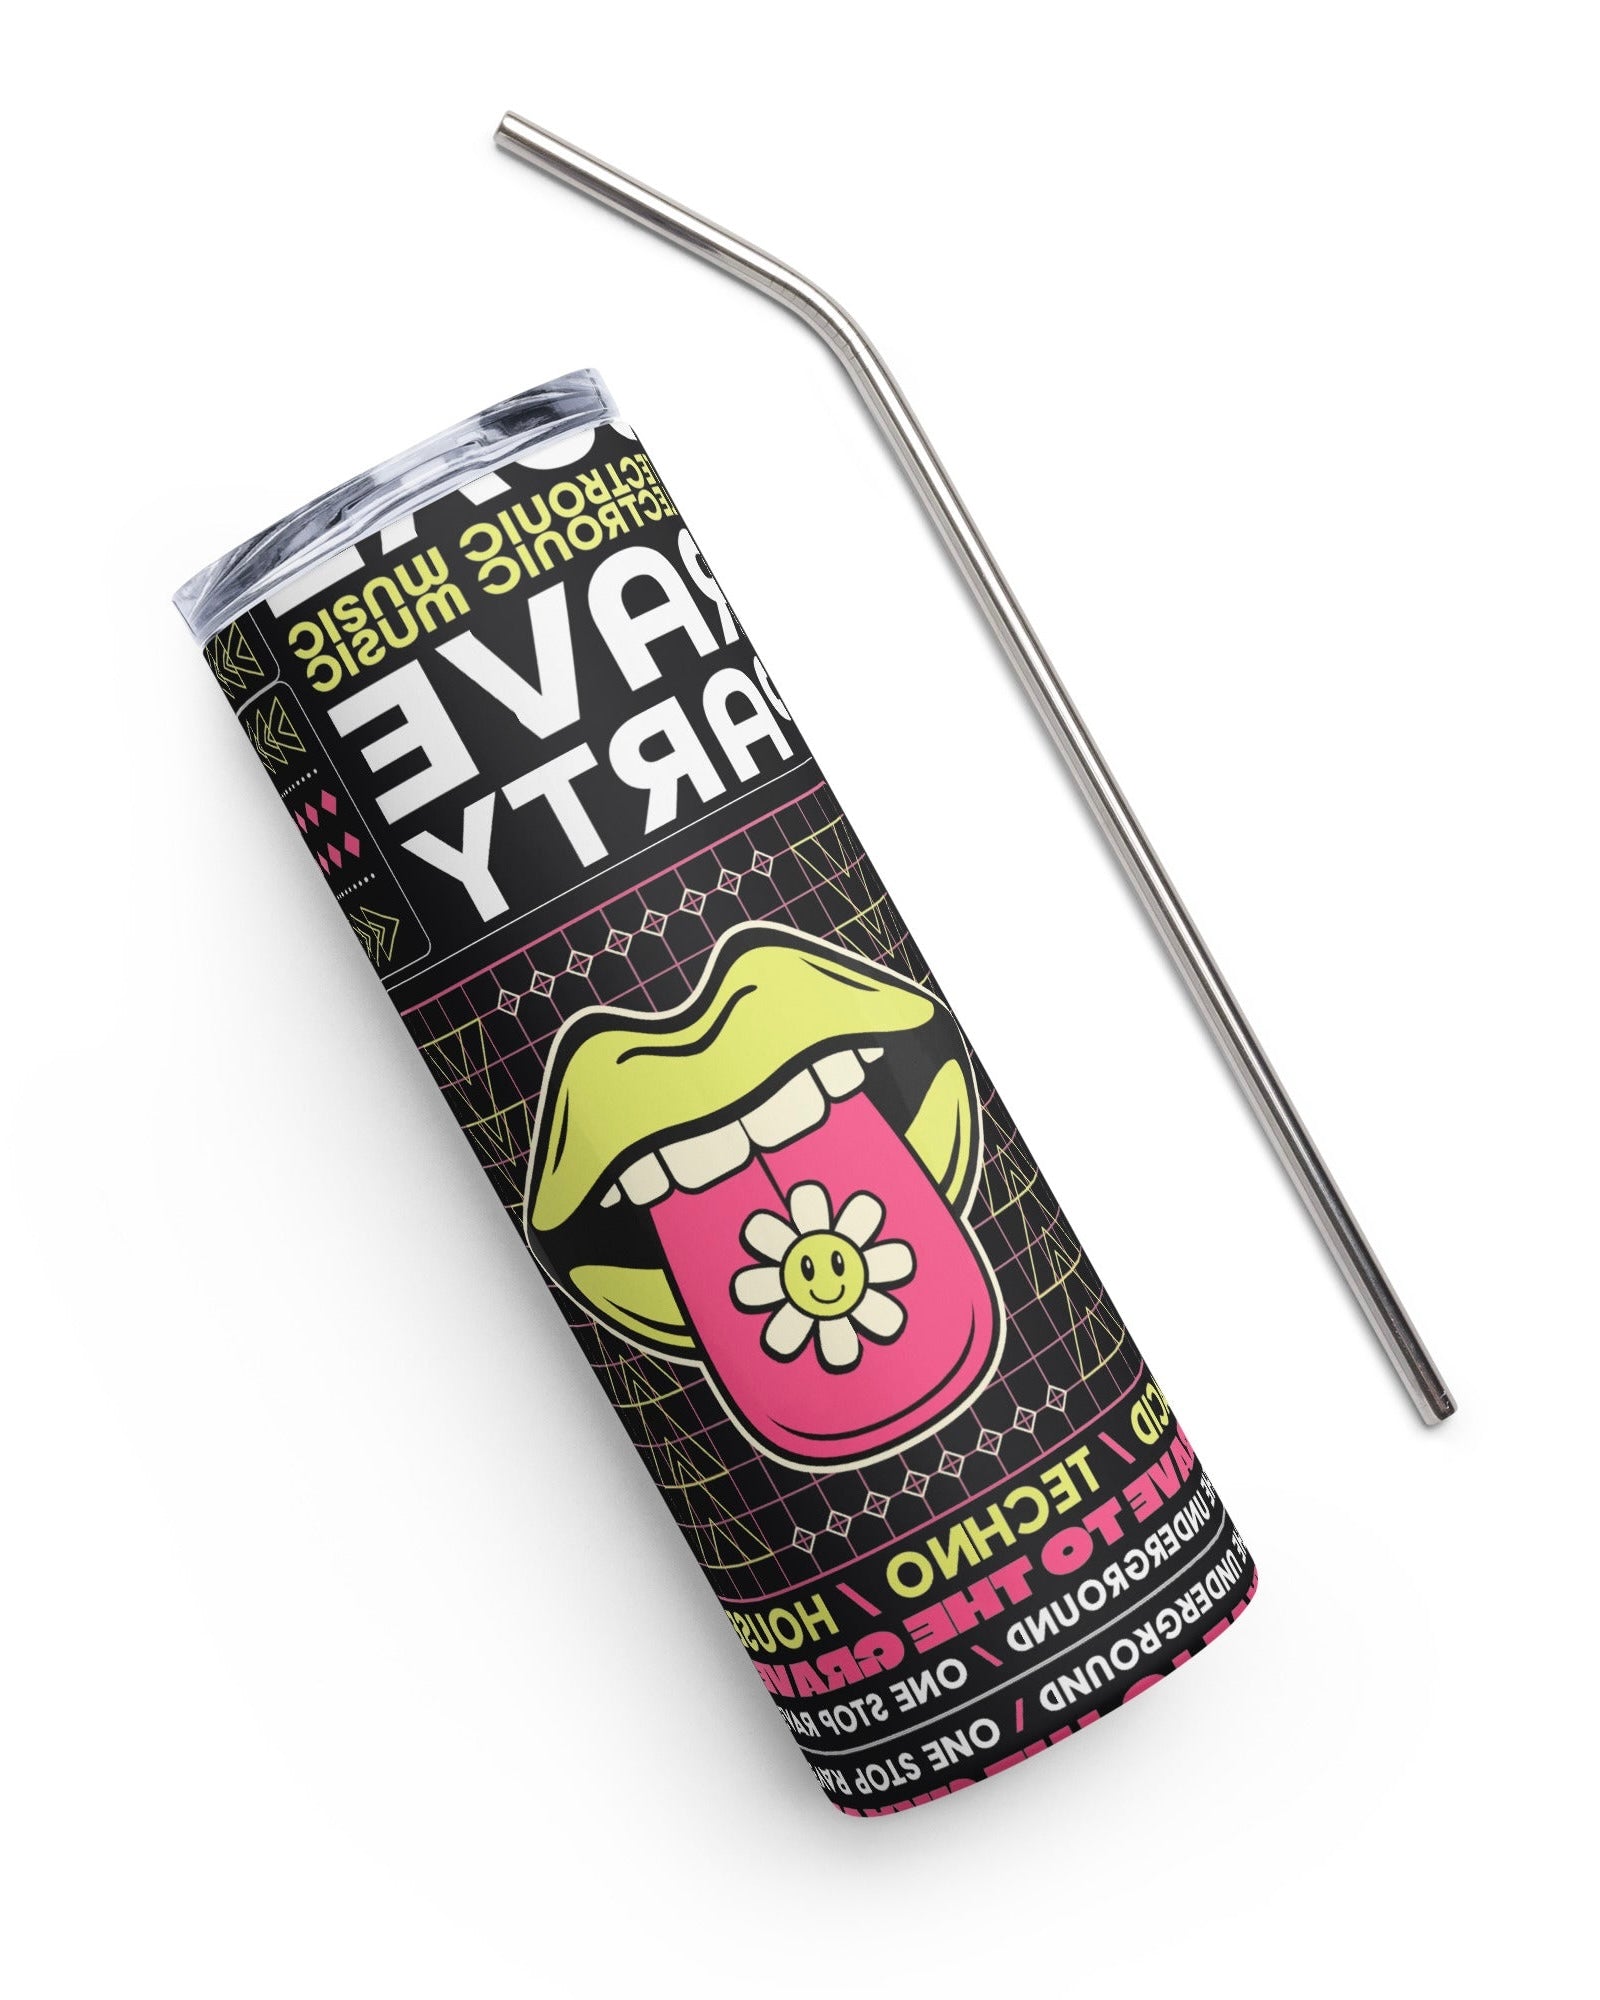 90s Rave Party Stainless Steel Tumbler